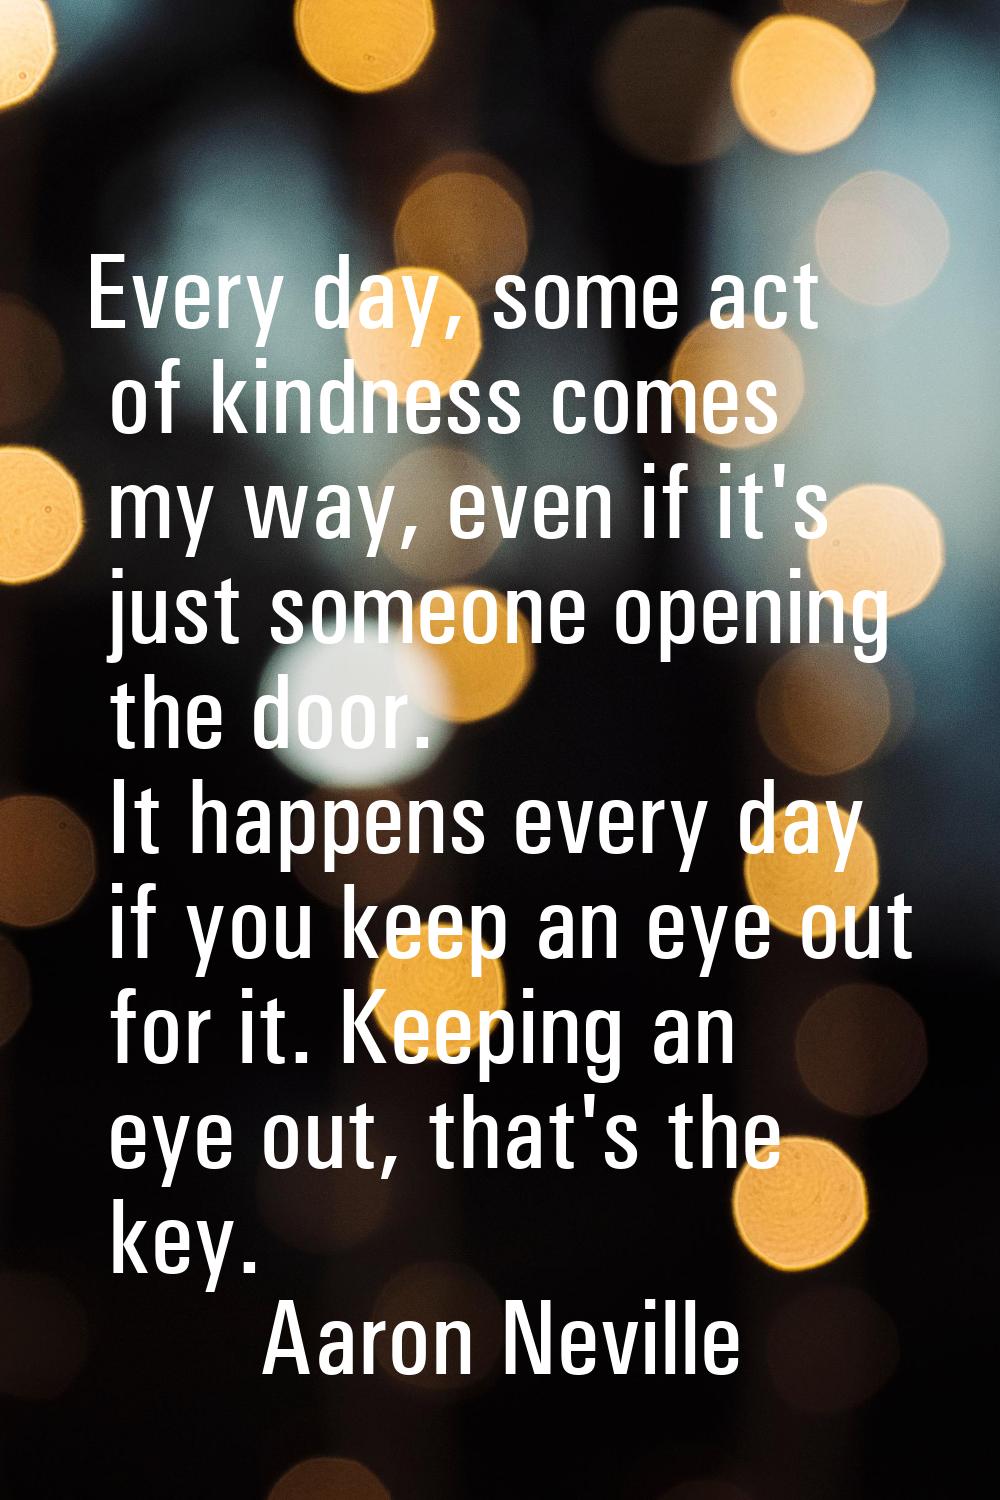 Every day, some act of kindness comes my way, even if it's just someone opening the door. It happen